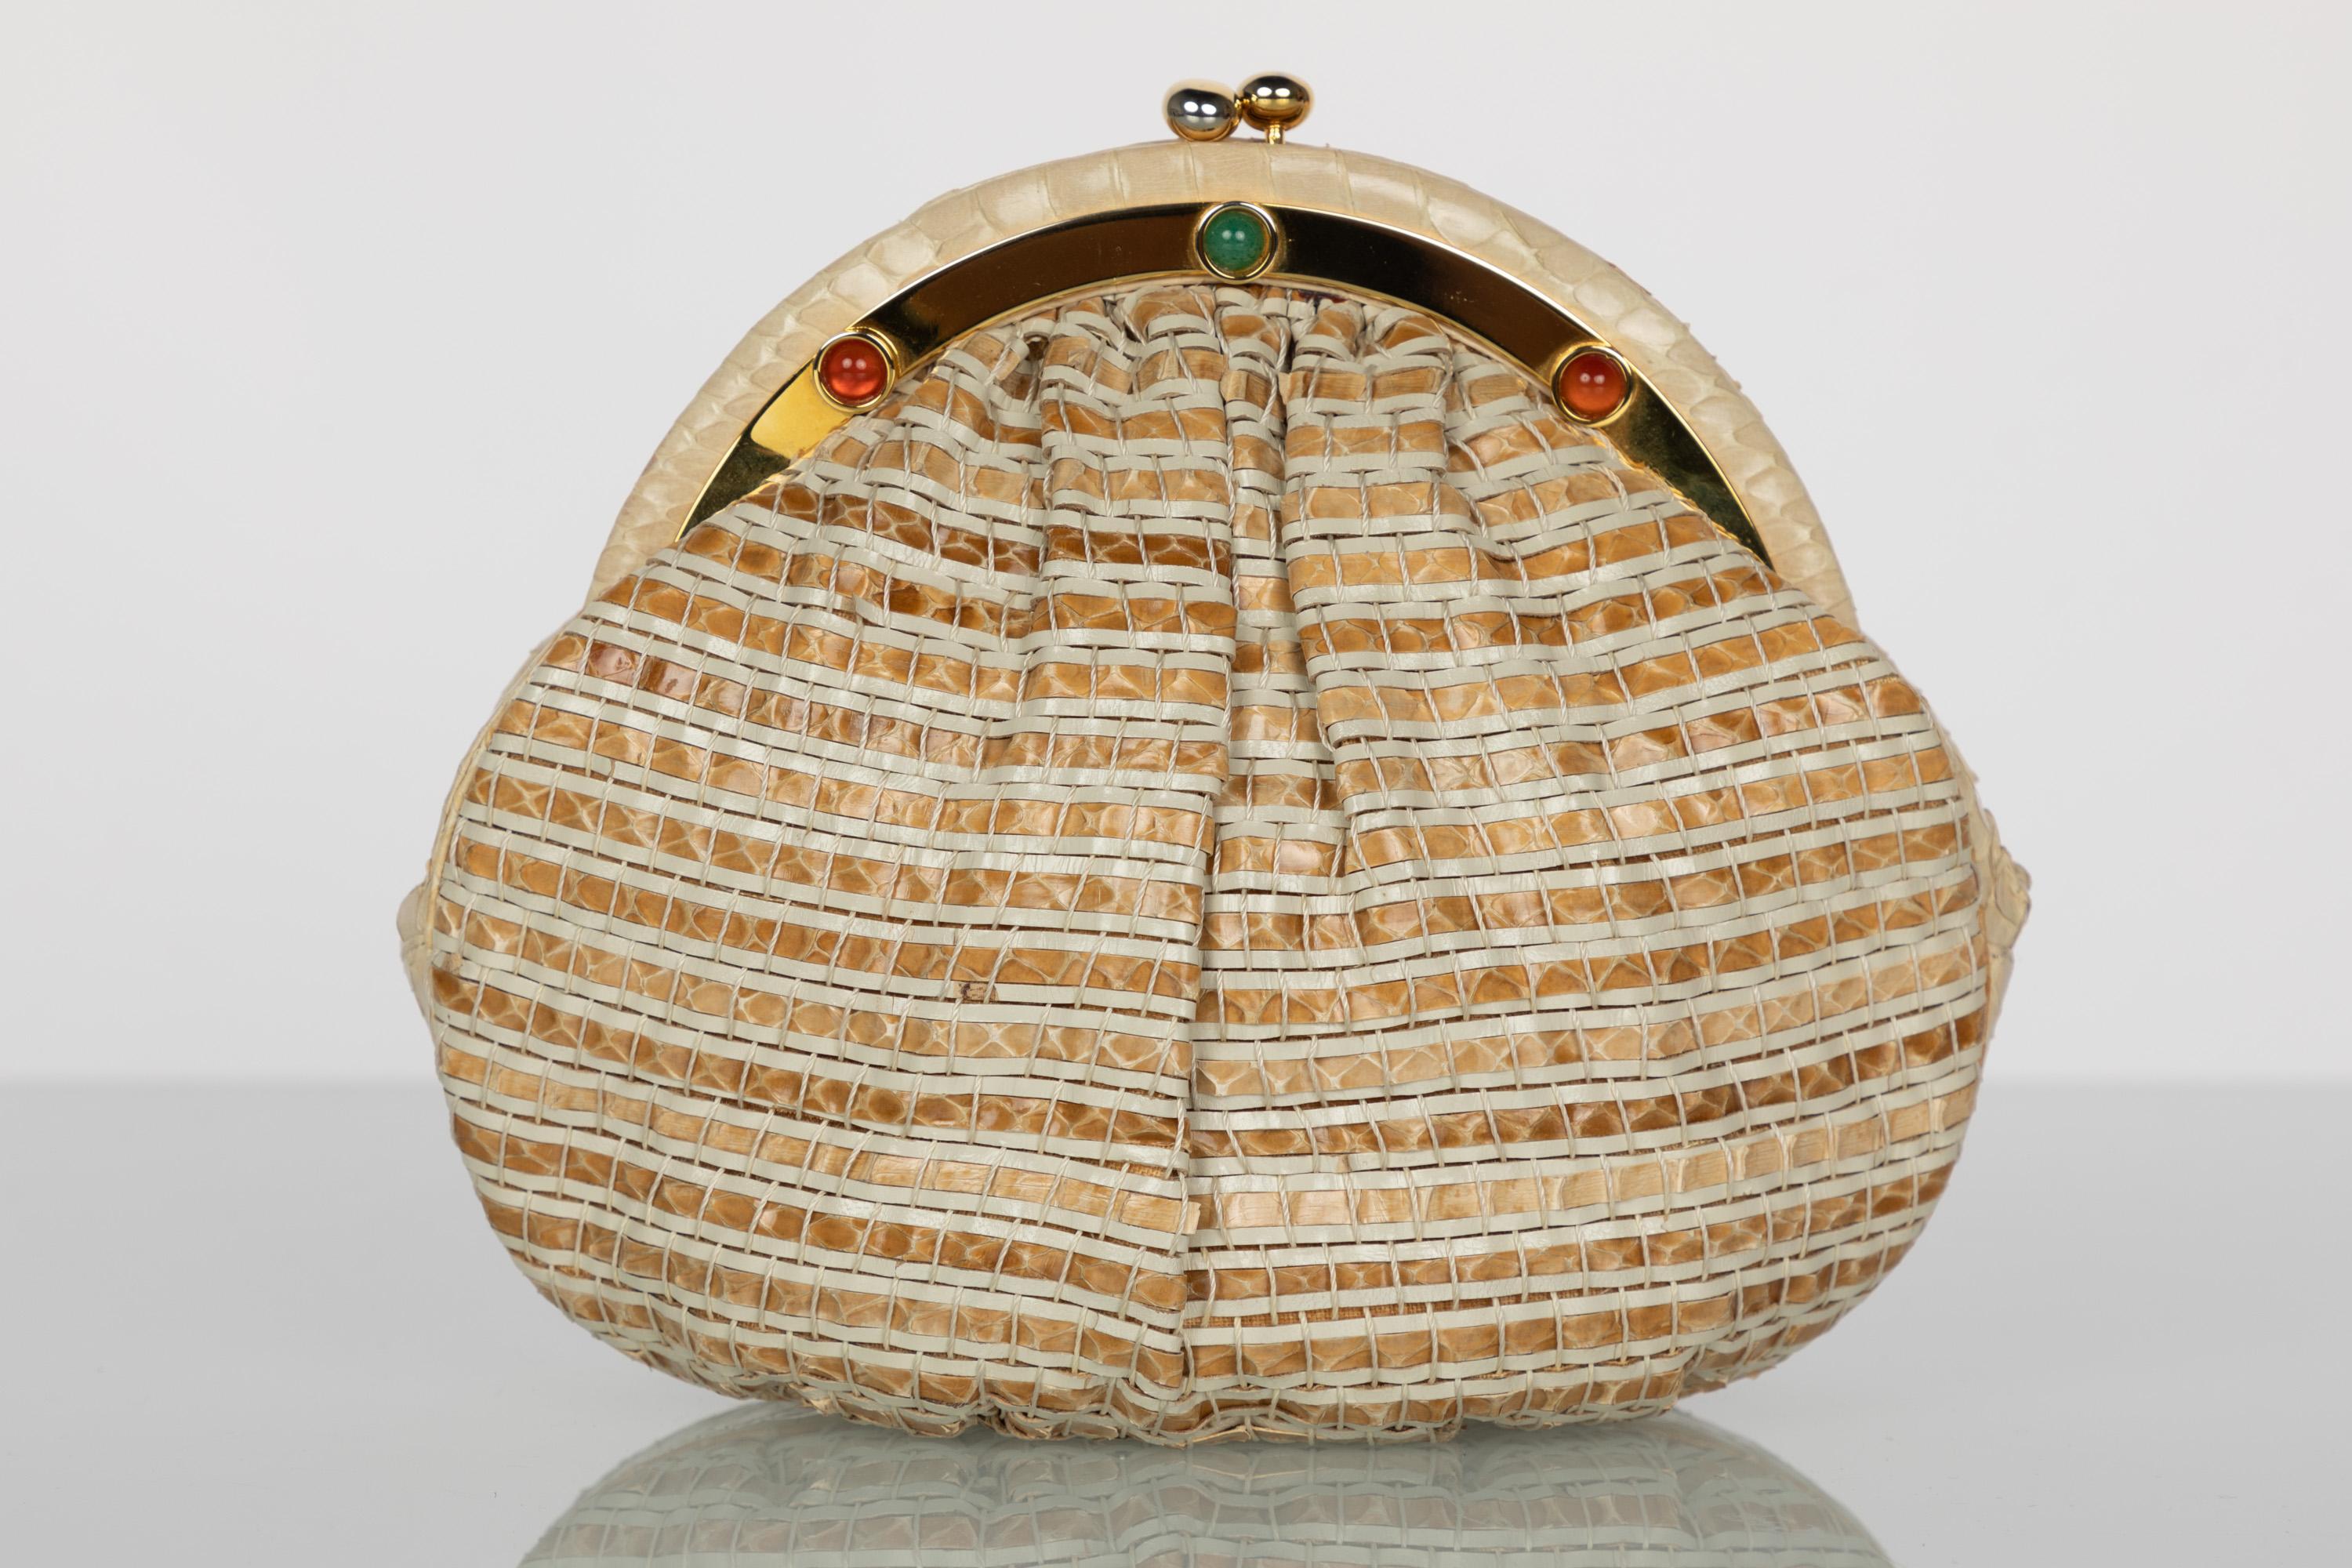  Judith Leiber Limited Edition Woven Snakeskin Clutch Bag In Good Condition In Boca Raton, FL